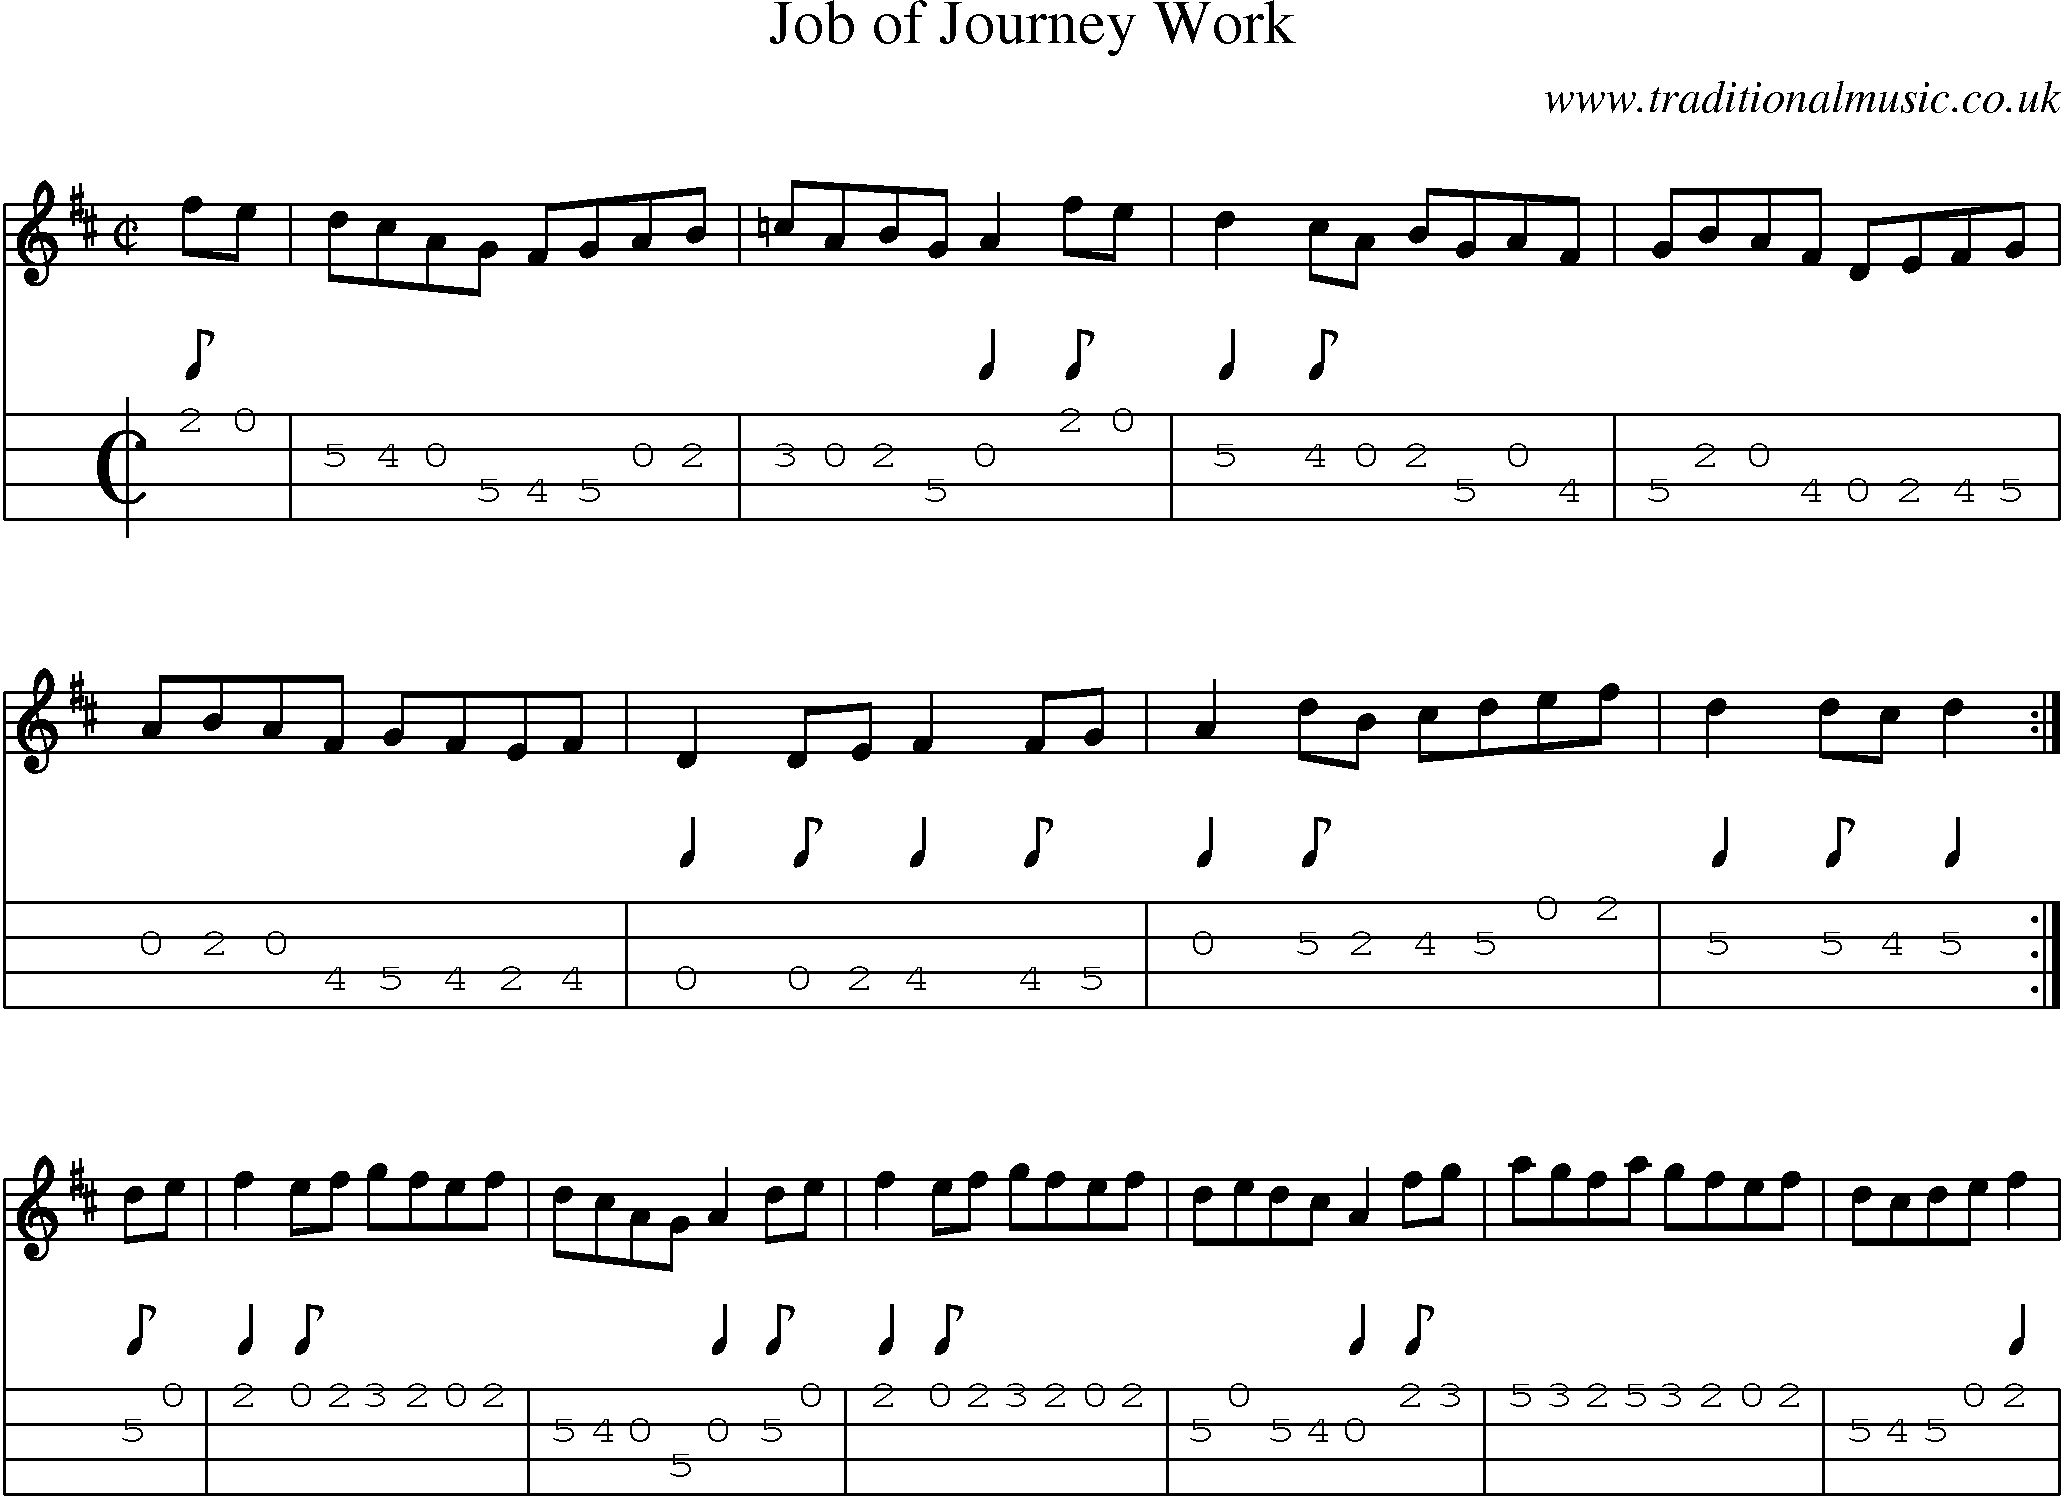 Music Score and Mandolin Tabs for Job Of Journey Work